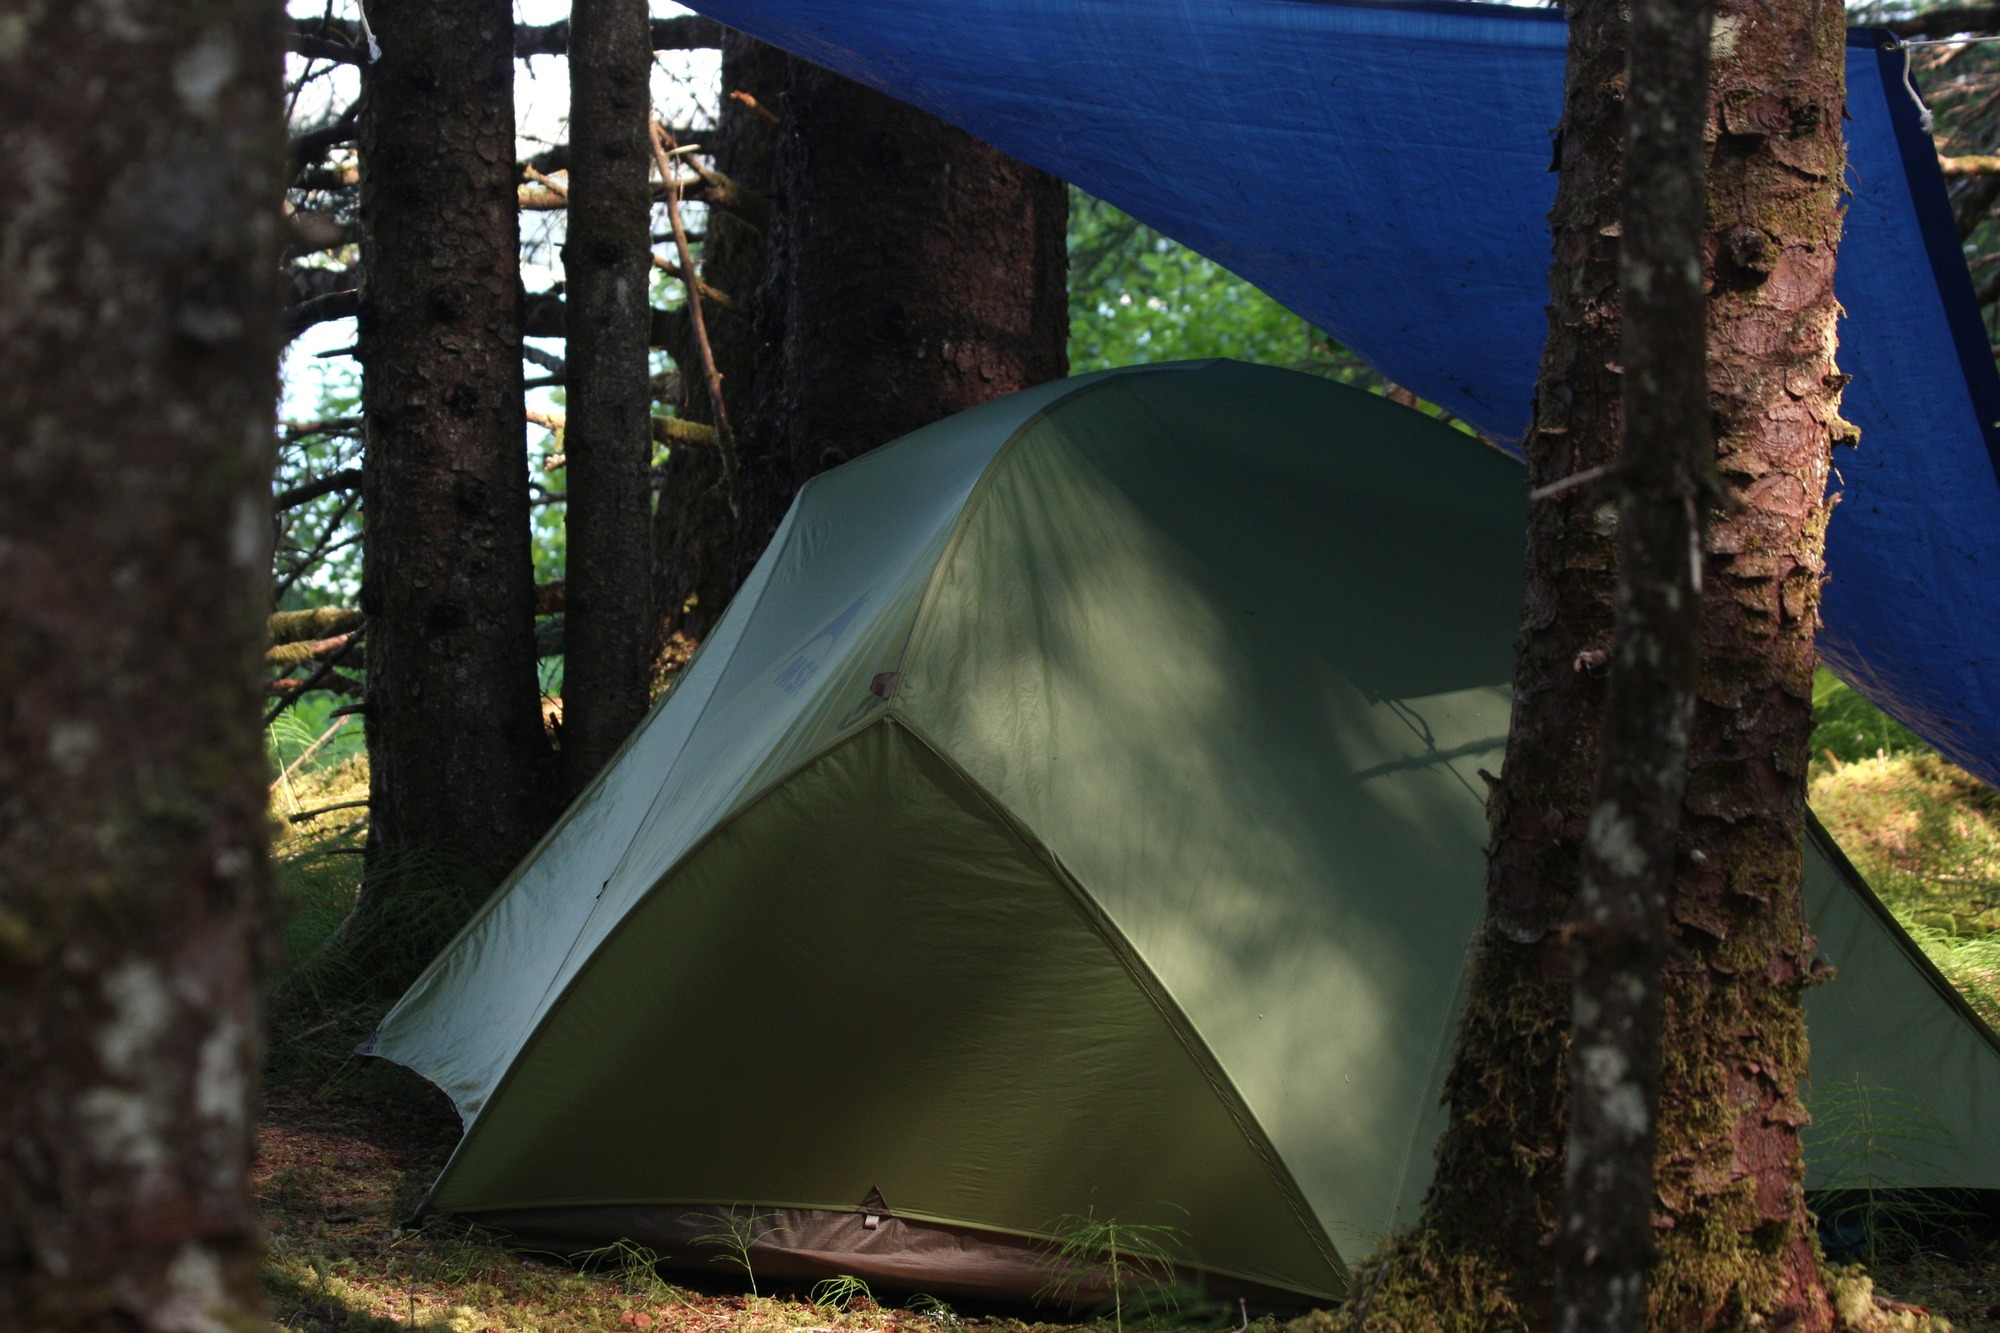 A green tent with a blue tarp above it sits between trees.